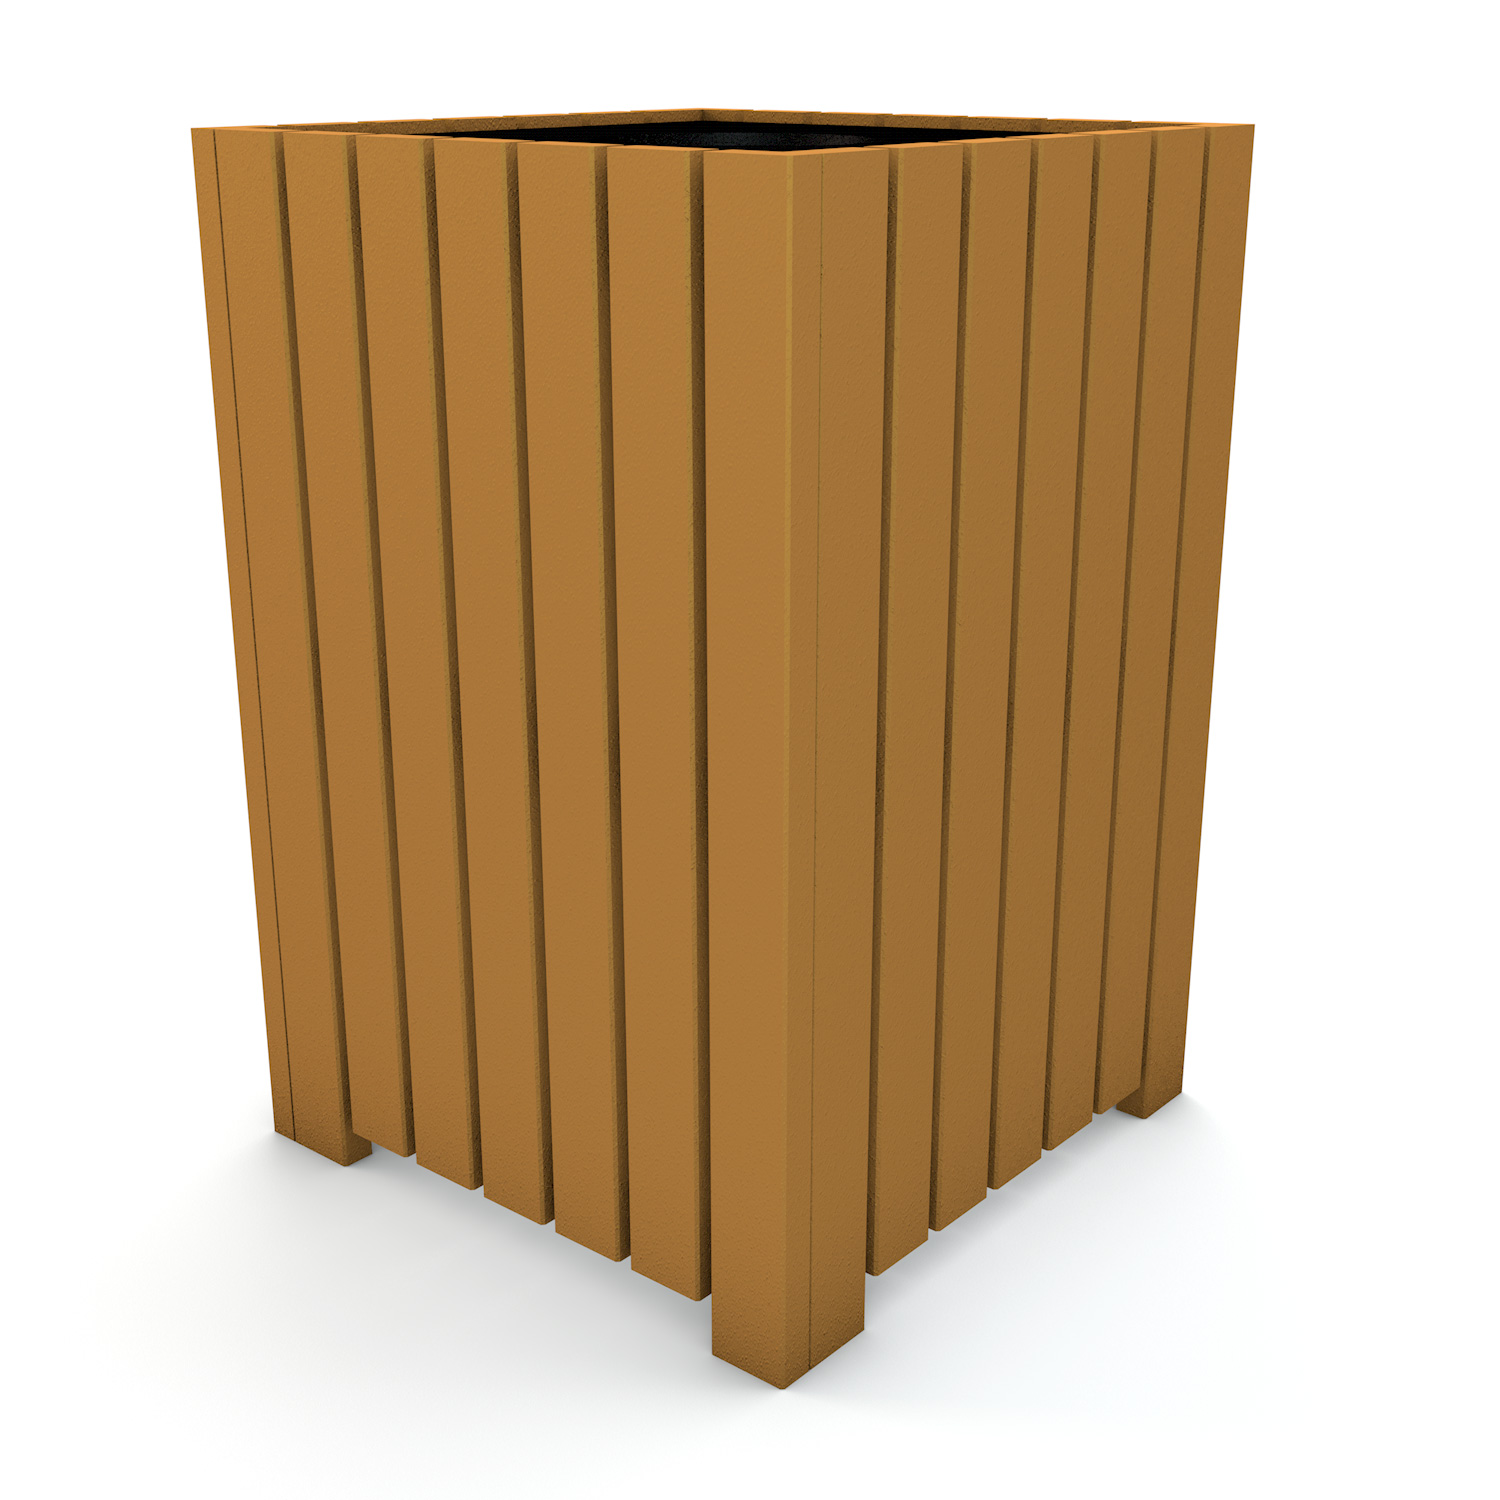 32 Gallon Heavy-Duty Square Recycled Plastic Trash Receptacle